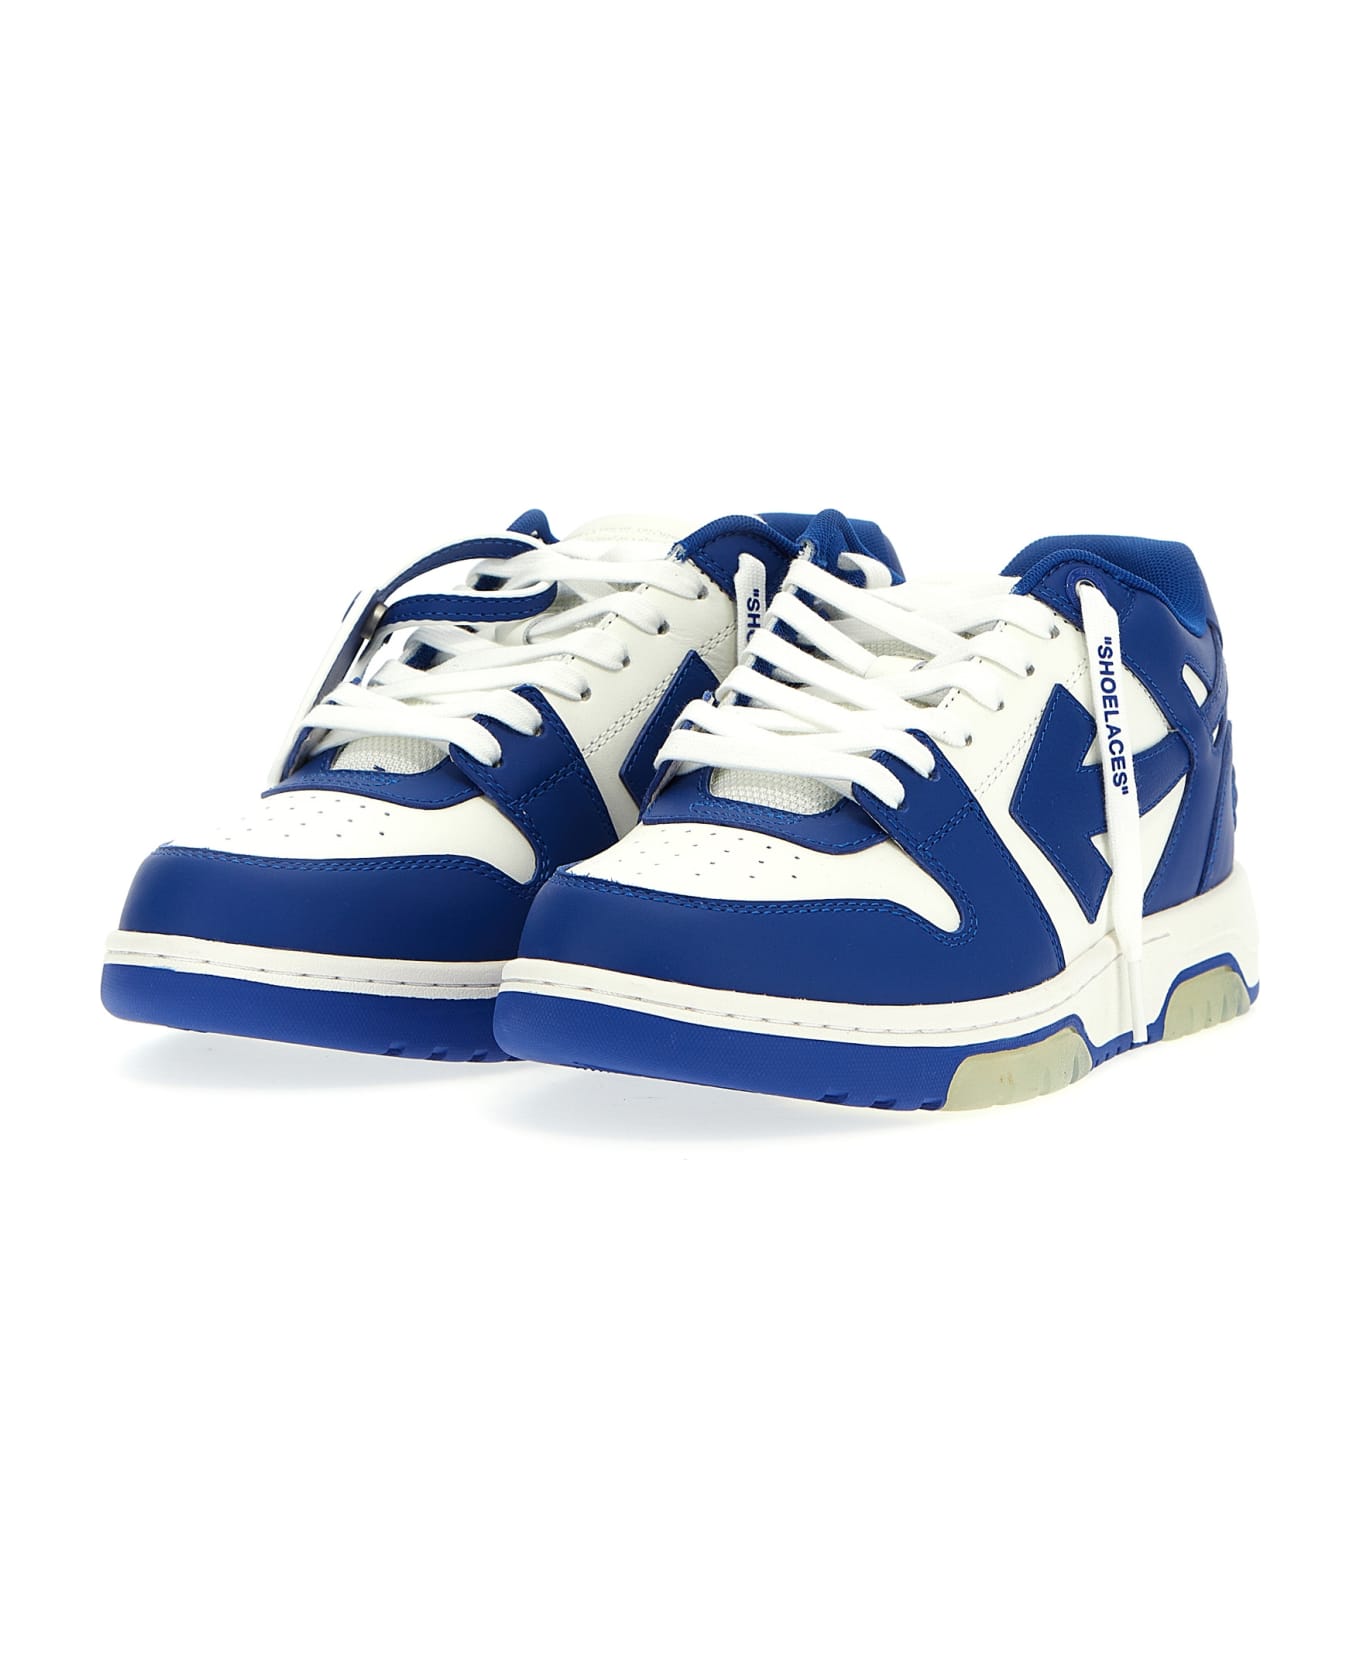 Off-White 'out Of Office' Sneakers - Blue